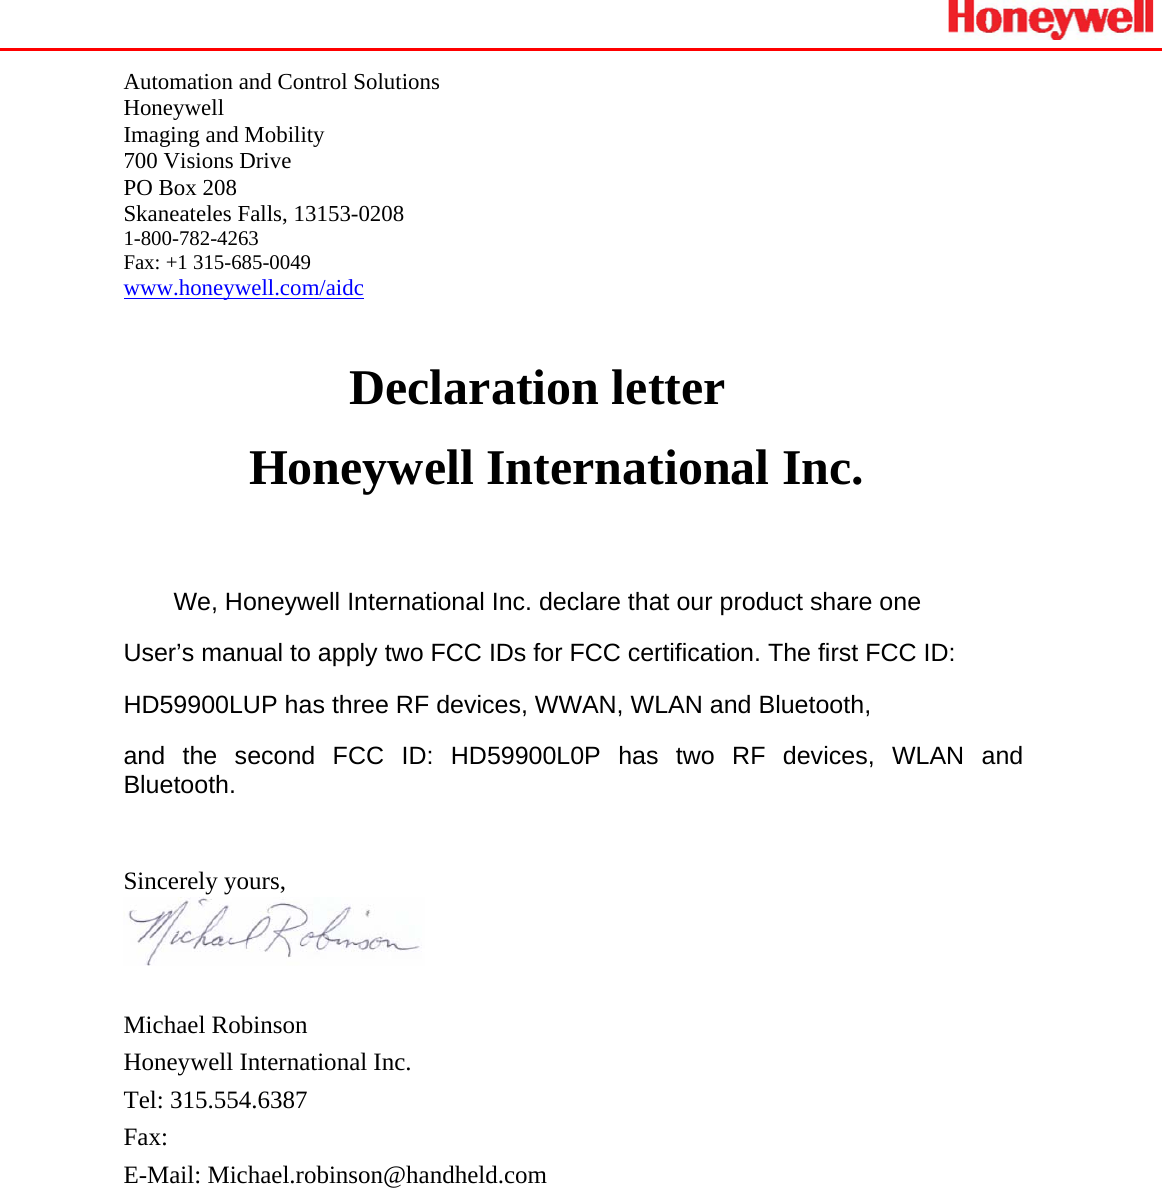    Automation and Control Solutions Honeywell Imaging and Mobility 700 Visions Drive  PO Box 208 Skaneateles Falls, 13153-0208 1-800-782-4263 Fax: +1 315-685-0049 www.honeywell.com/aidc Declaration letter Honeywell International Inc.  We, Honeywell International Inc. declare that our product share one  User’s manual to apply two FCC IDs for FCC certification. The first FCC ID:  HD59900LUP has three RF devices, WWAN, WLAN and Bluetooth,  and the second FCC ID: HD59900L0P has two RF devices, WLAN and Bluetooth.   Sincerely yours,                              Michael Robinson Honeywell International Inc. Tel: 315.554.6387 Fax:  E-Mail: Michael.robinson@handheld.com  